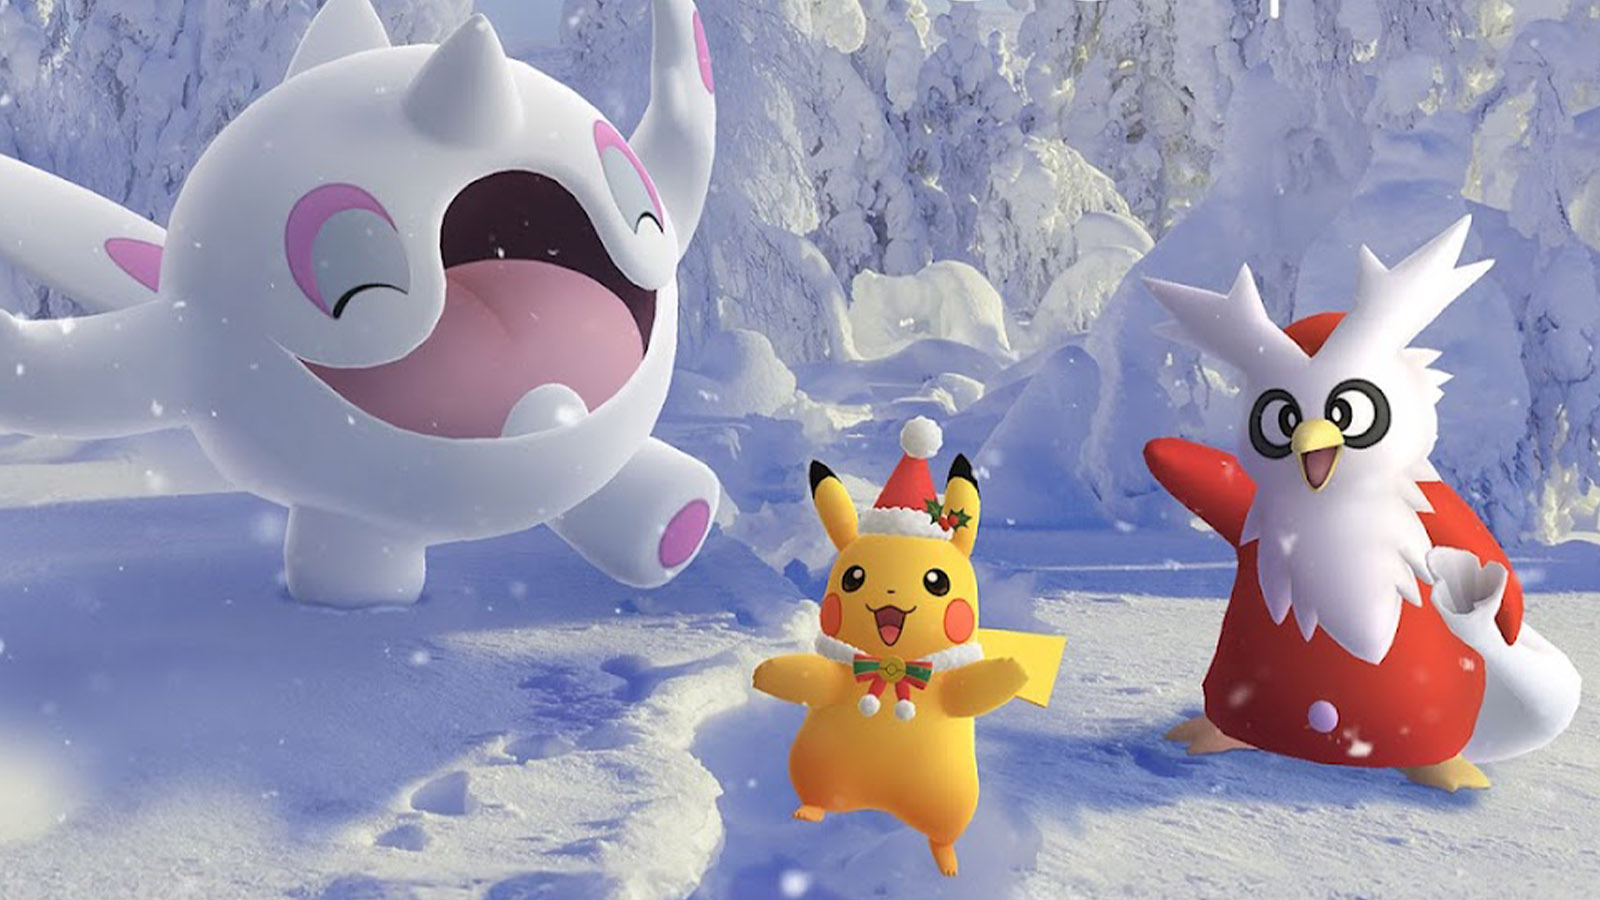 Pokémon Go Winter Holiday Part 1 and Part 2, including Winter